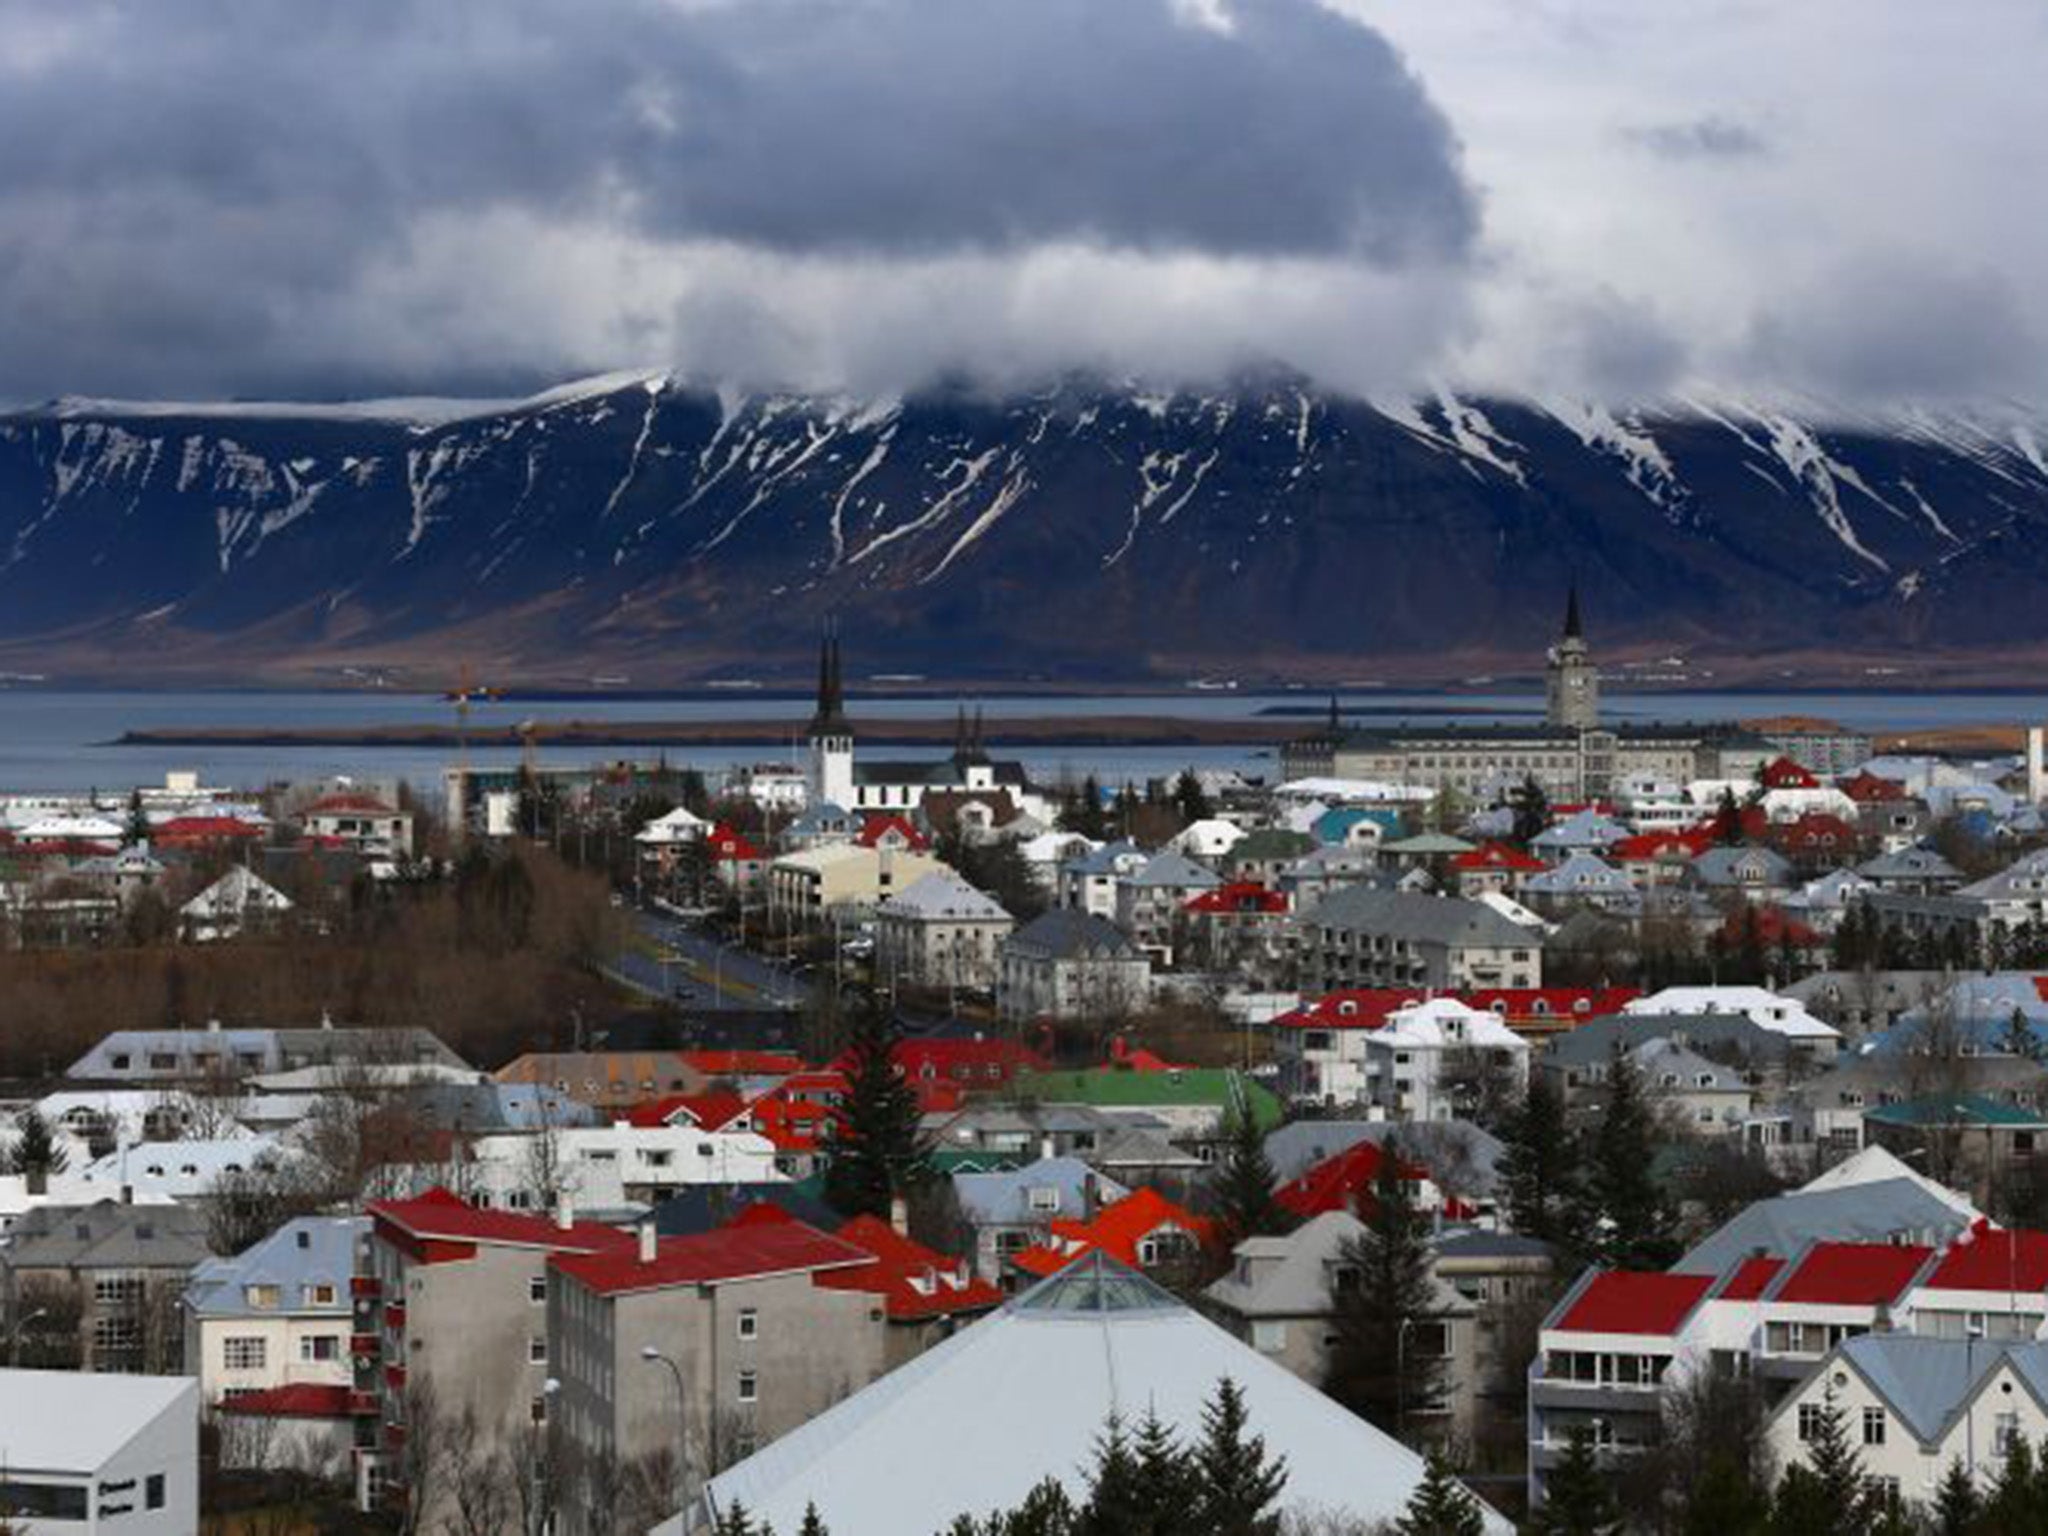 Spend a day in Reykjavik and lower your APD liability